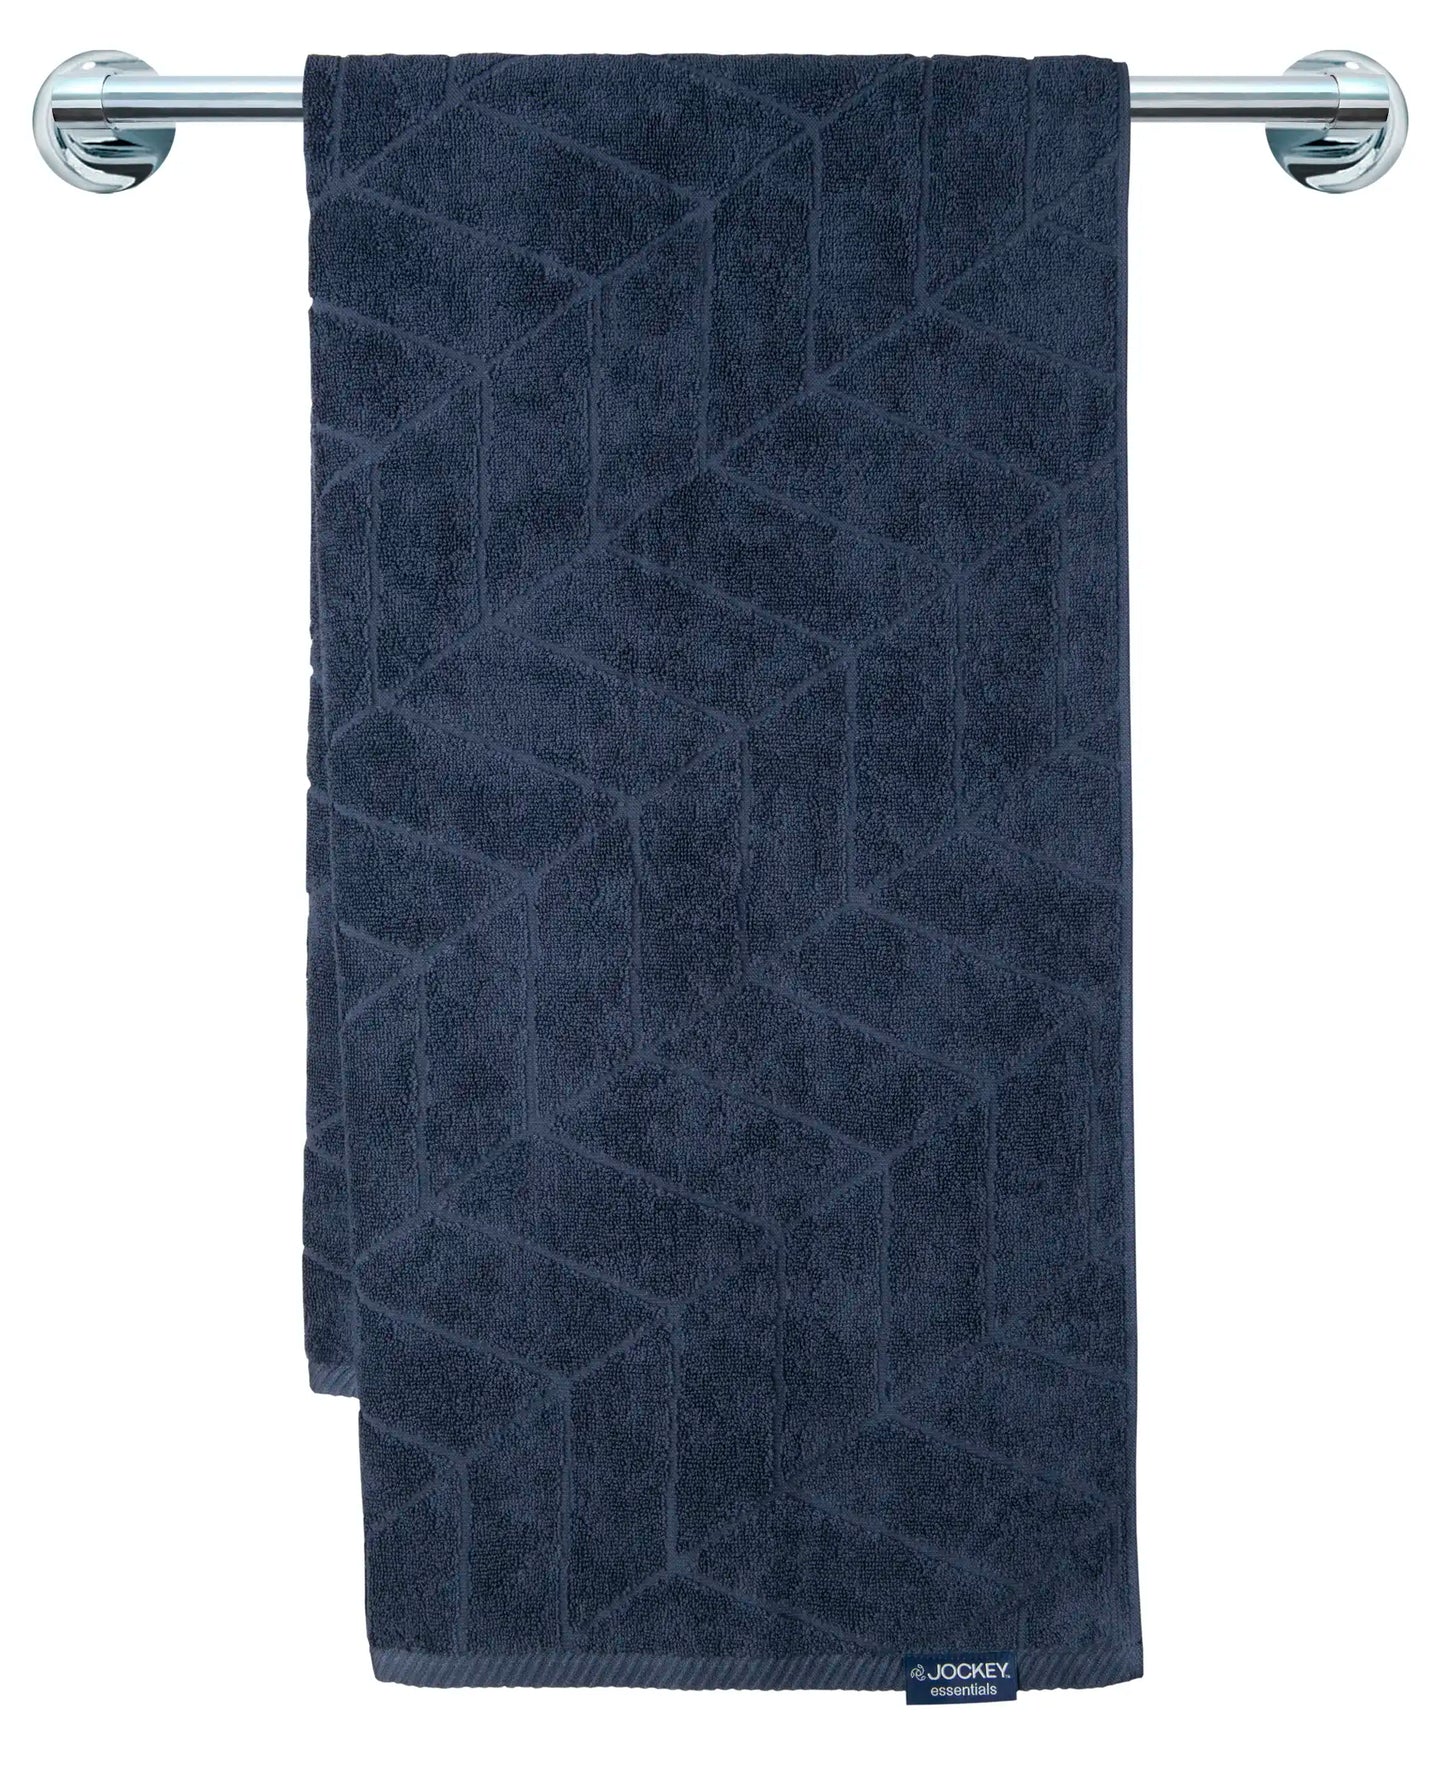 Cotton Terry Ultrasoft and Durable Patterned Bath Towel - Navy-3